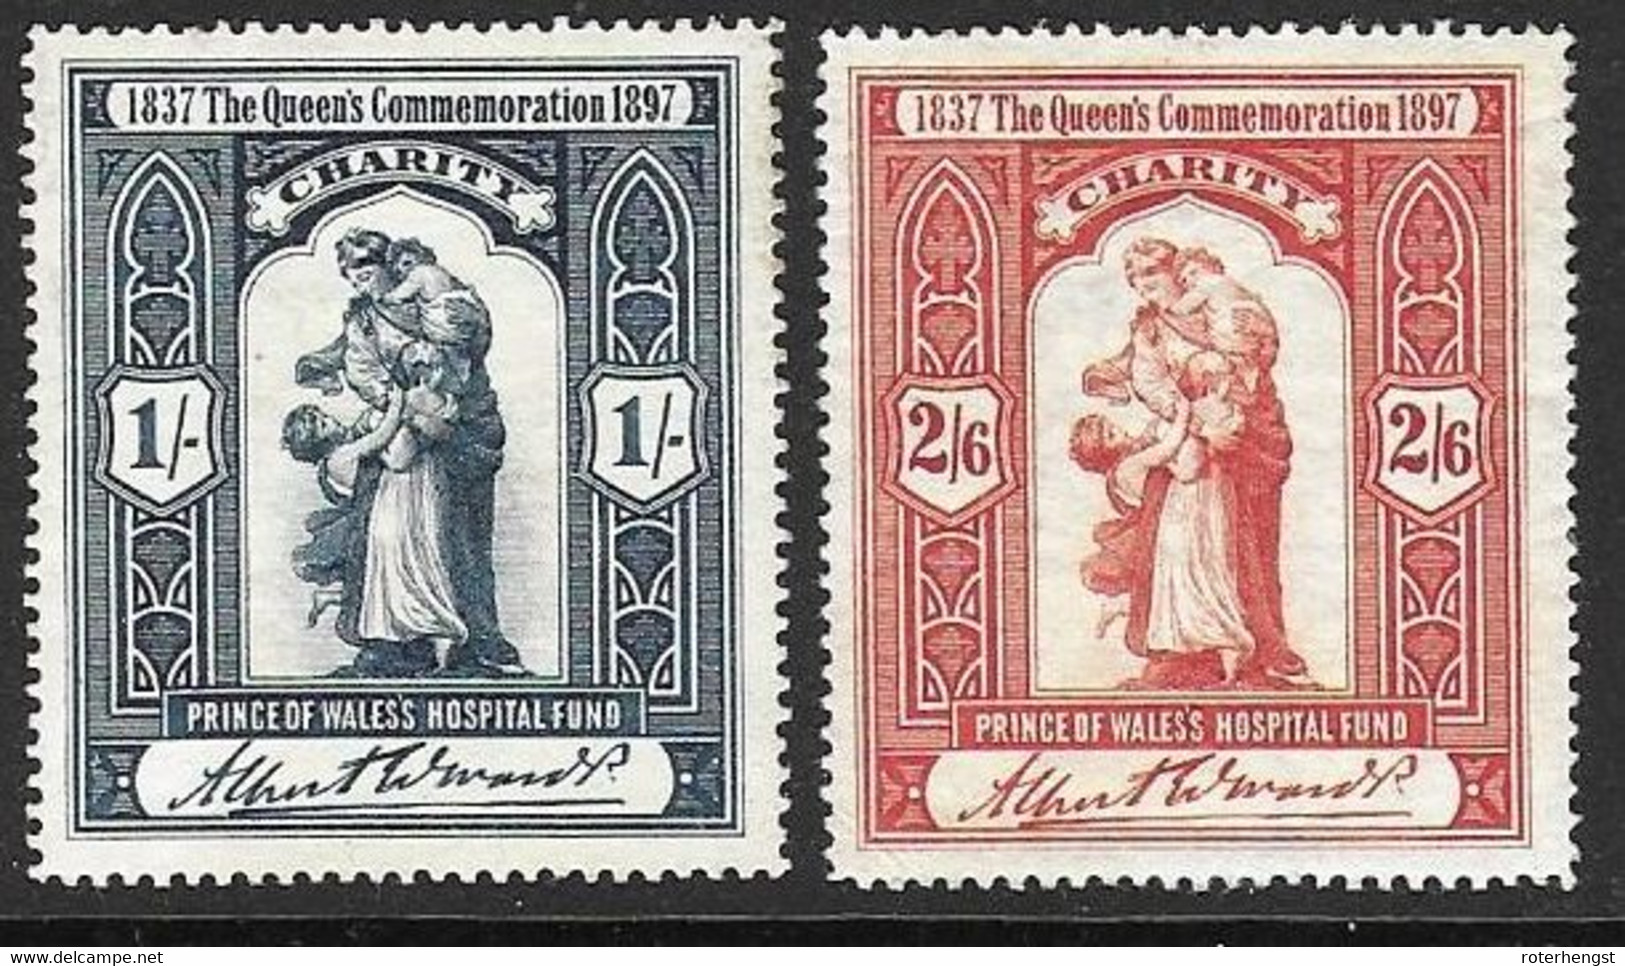 Queens Commemoration 1897 Mh * Charity Stamps - Ungebraucht